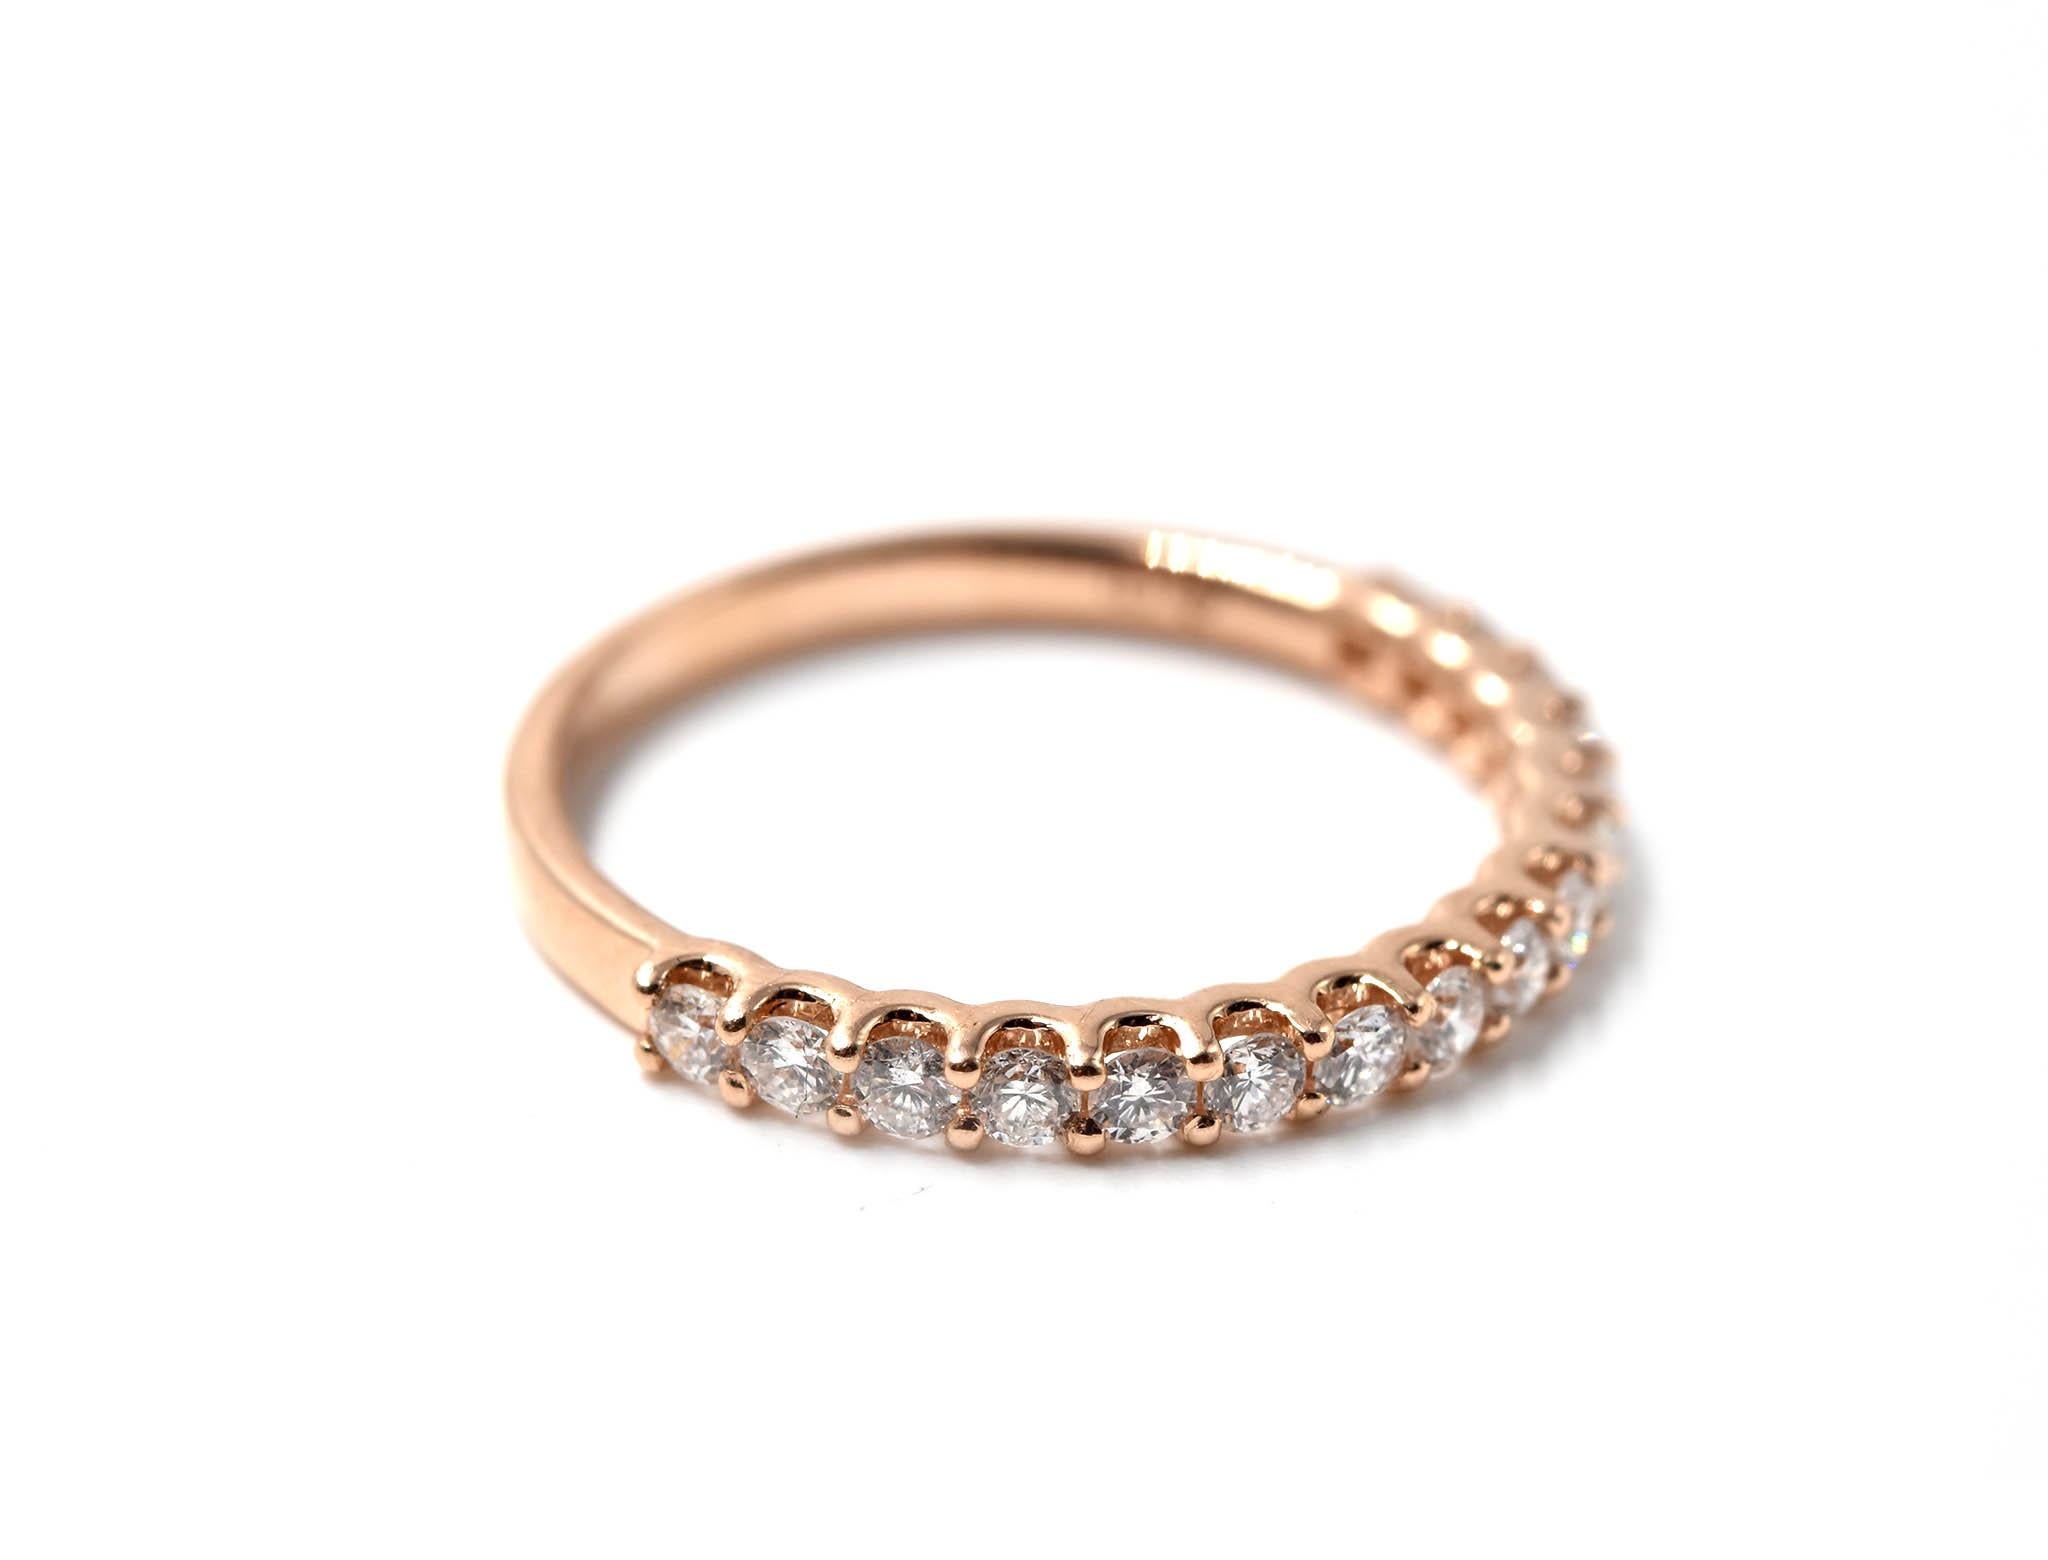 Designer: custom design
Material: 14k rose gold
Diamonds: 16 round brilliant cut diamonds = 0.37 carat total weight
Dimensions: band is 2.20mm wide
Ring size: 5 3/4 (please allow two additional shipping days for sizing requests)
Weight: 1.00 grams
